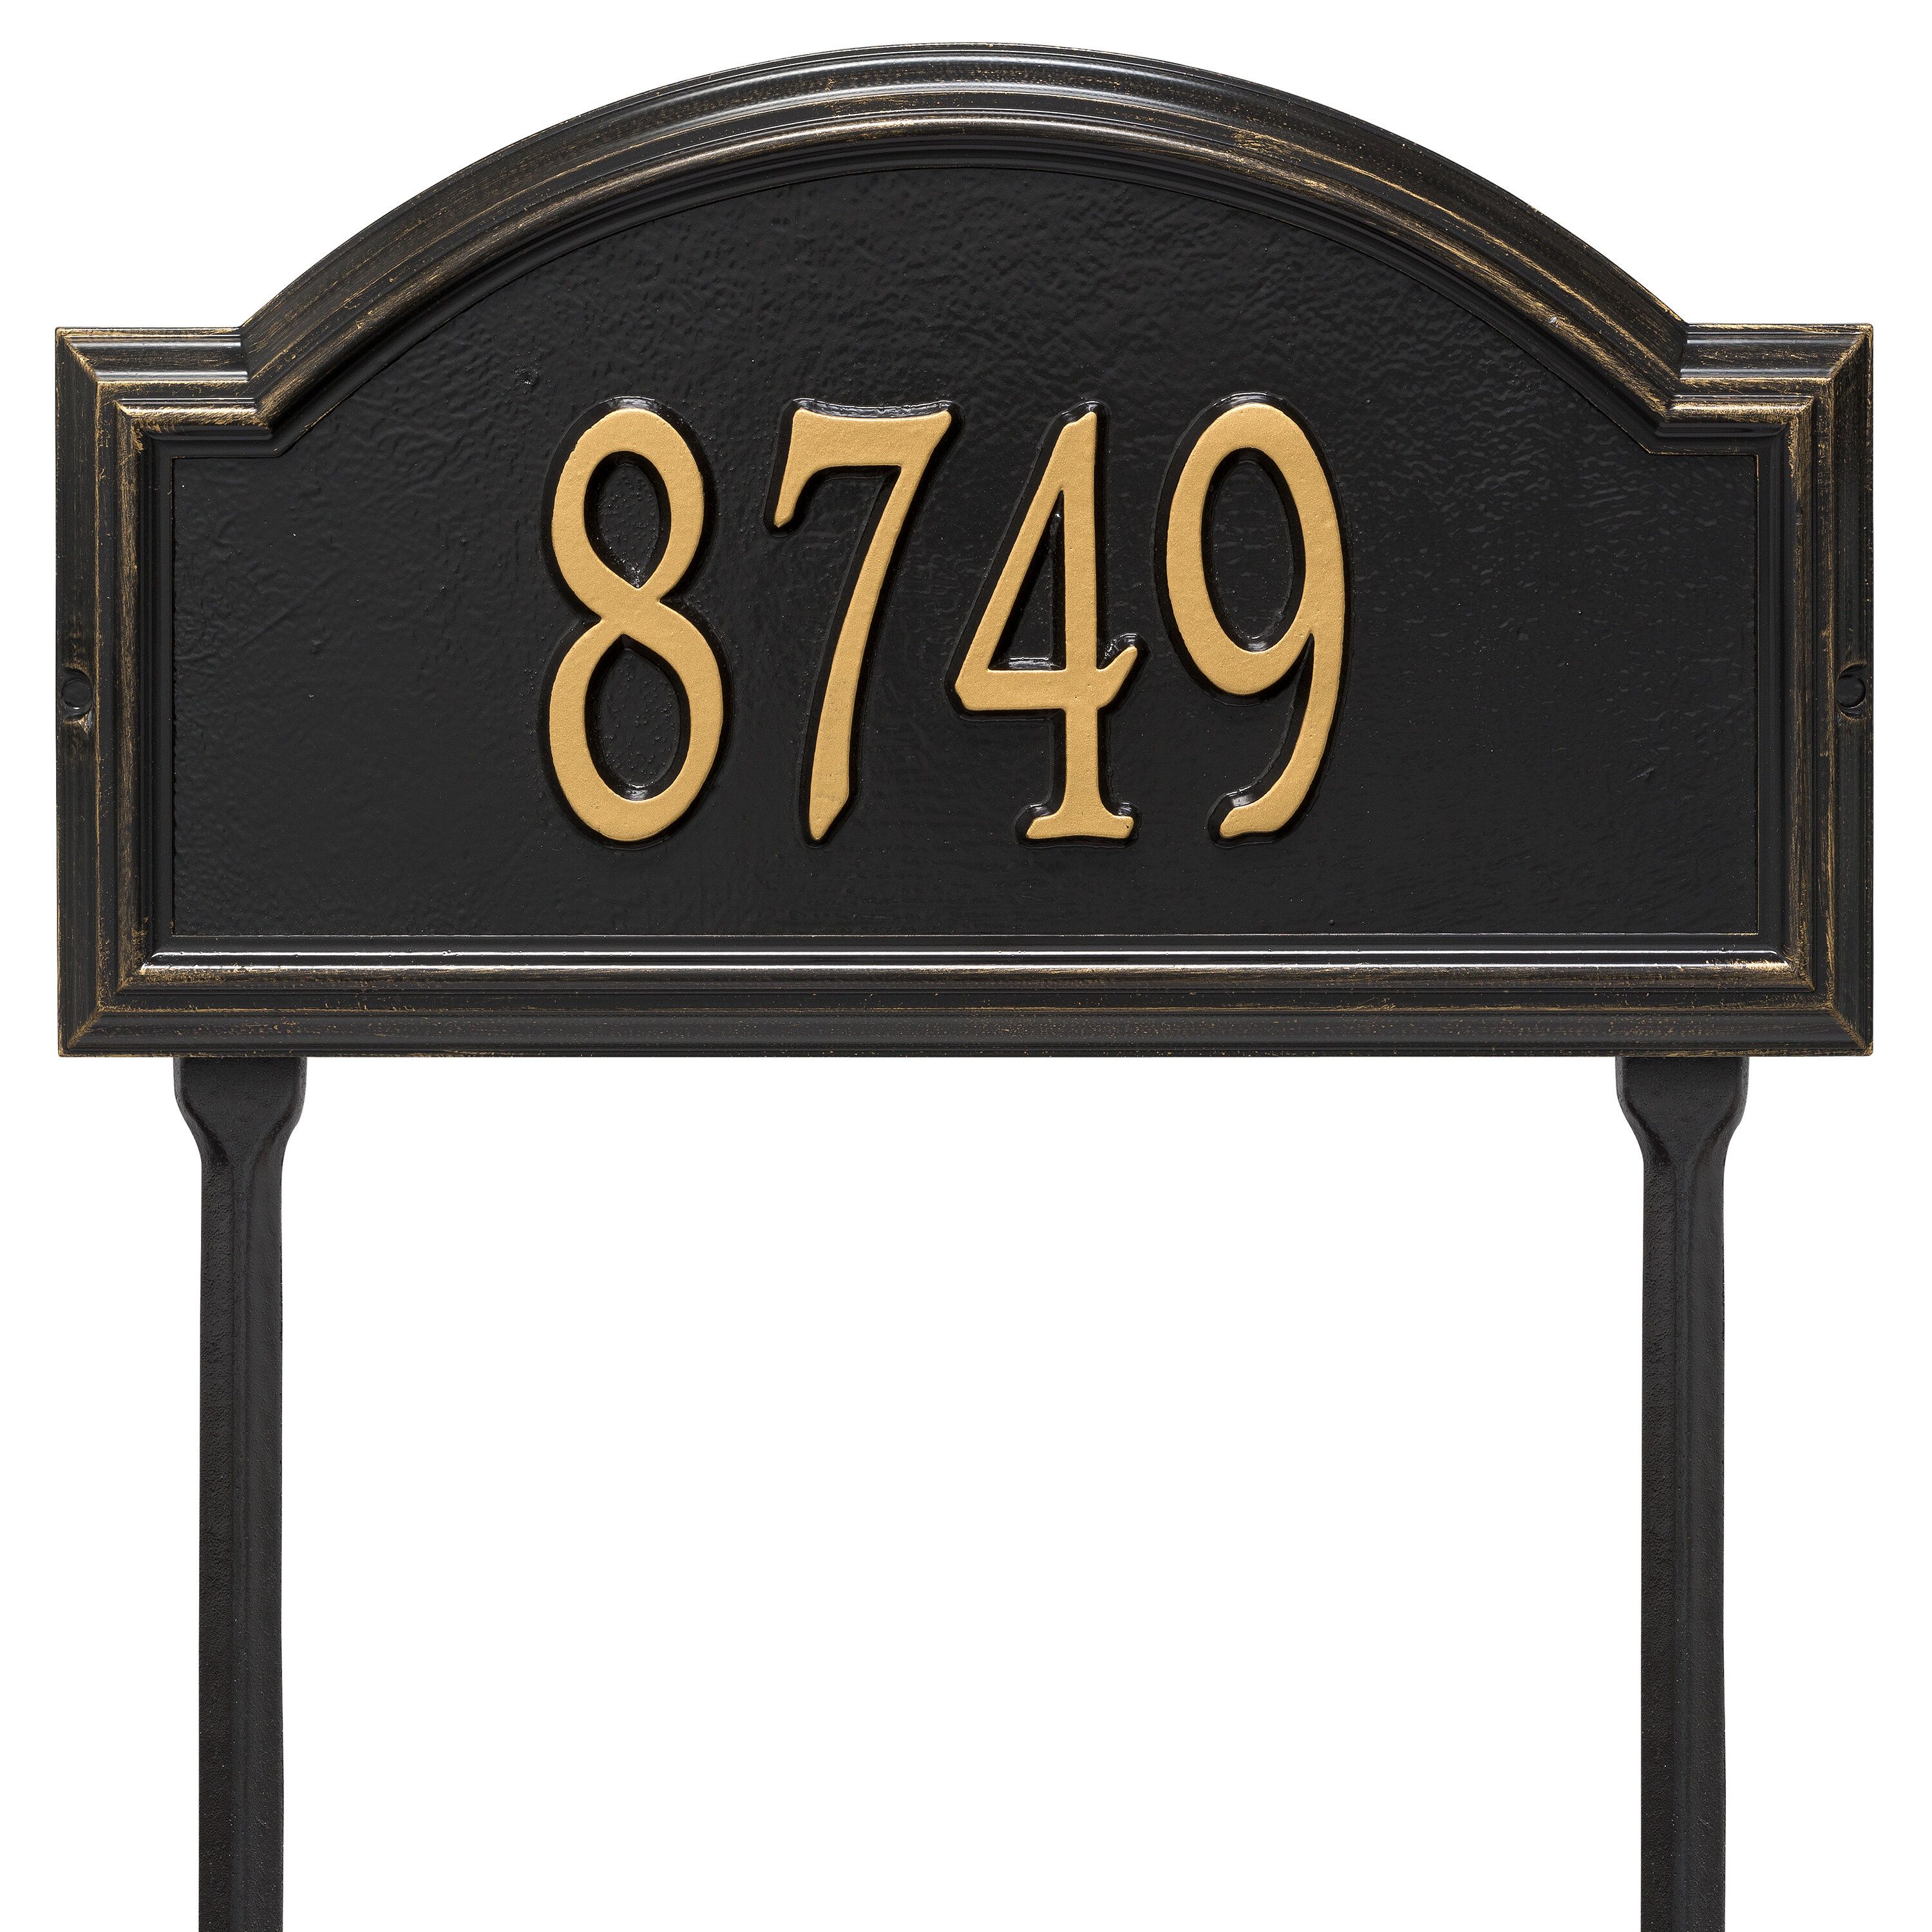 Whitehall Providence Arch - Standard Lawn - One Line Address Plaque 